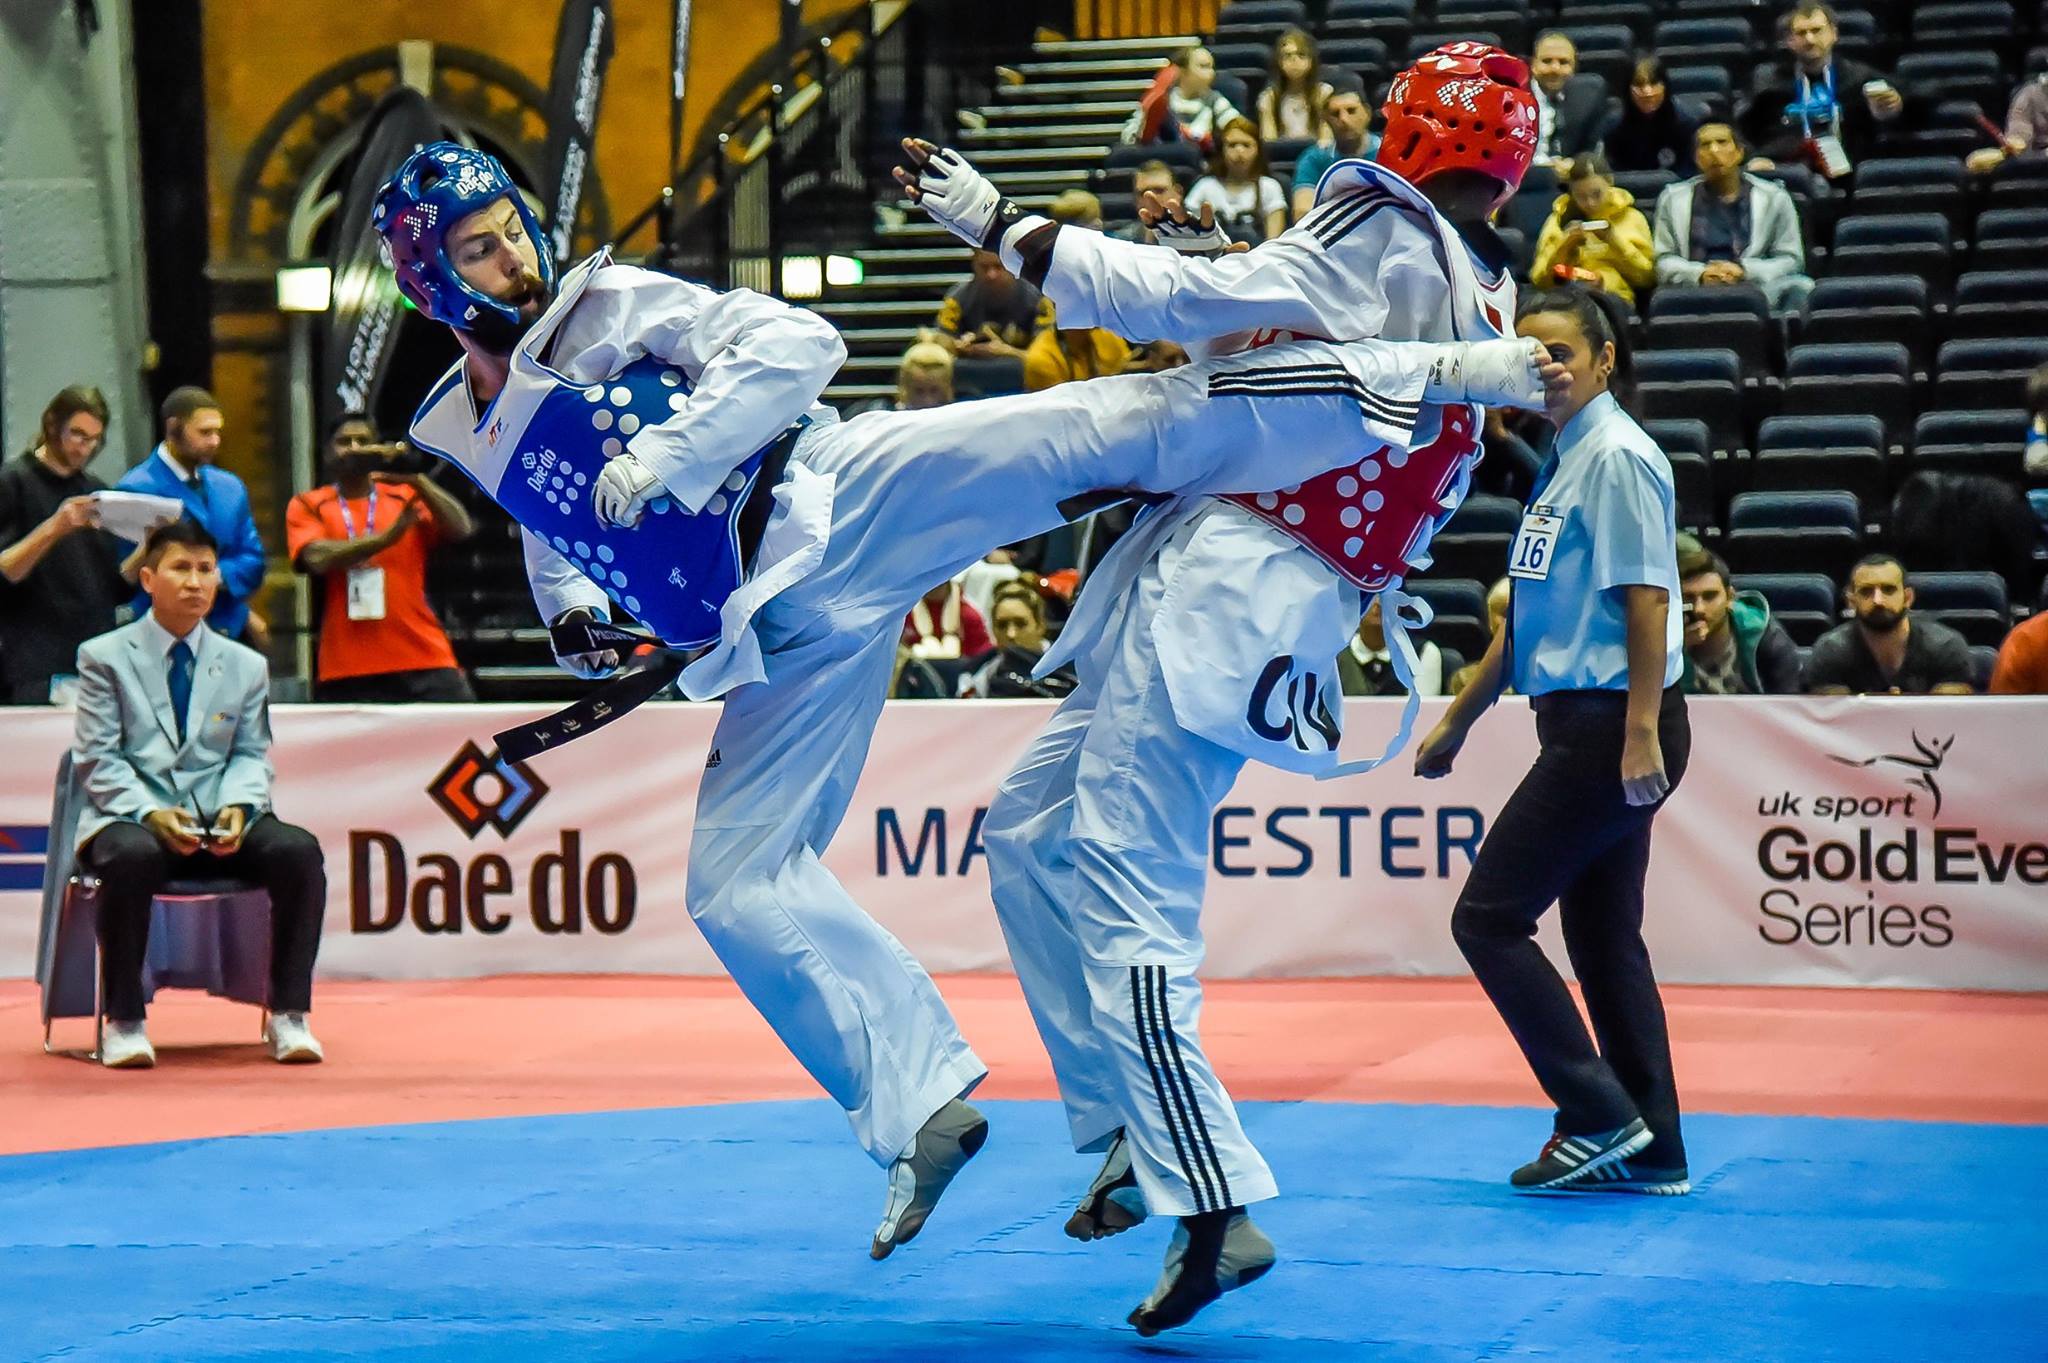 The Isle of Man's Aaron Cook produced the most exciting moment of the second day of the World Taekwondo Federation Grand Prix in Manchester when he knocked out Germany's Tahir Gulec but lost in the final to Iran's Mahdi Khodabakhshi ©WTF